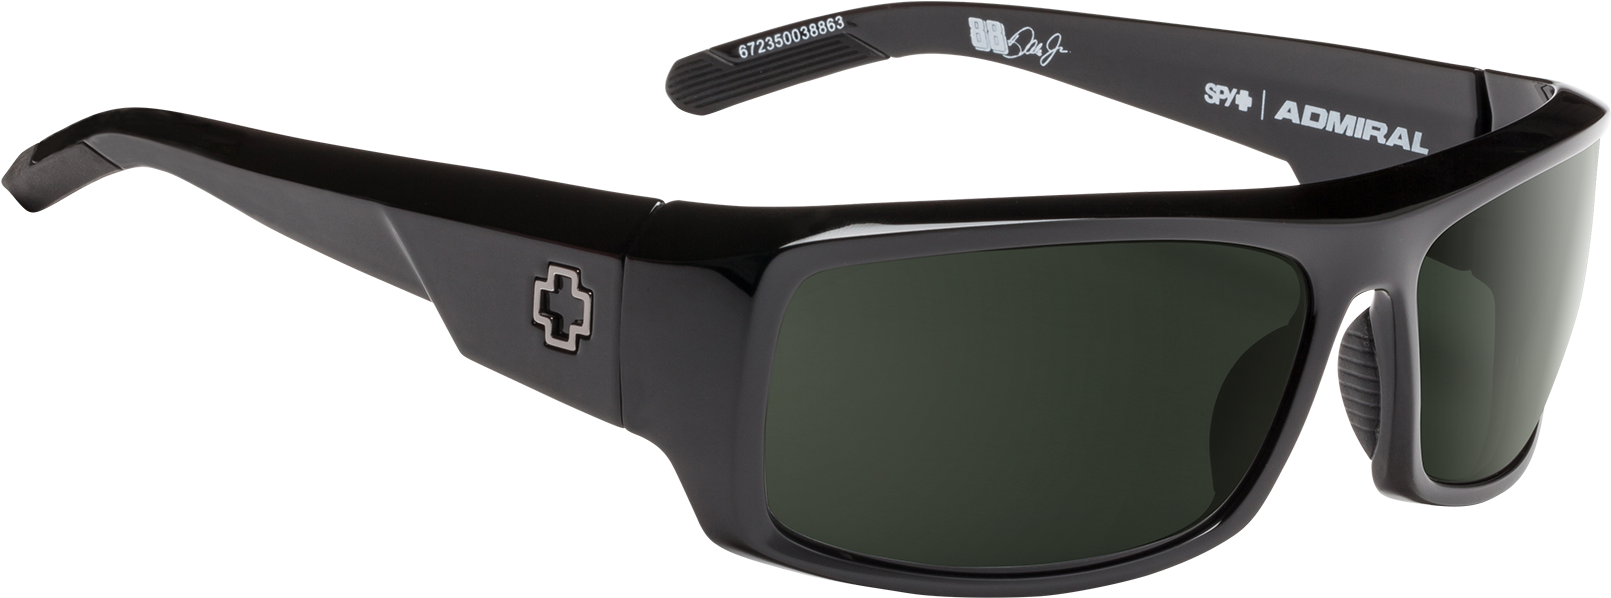 Admiral - Spy Rover Sunglasses Review (2000x1200), Png Download